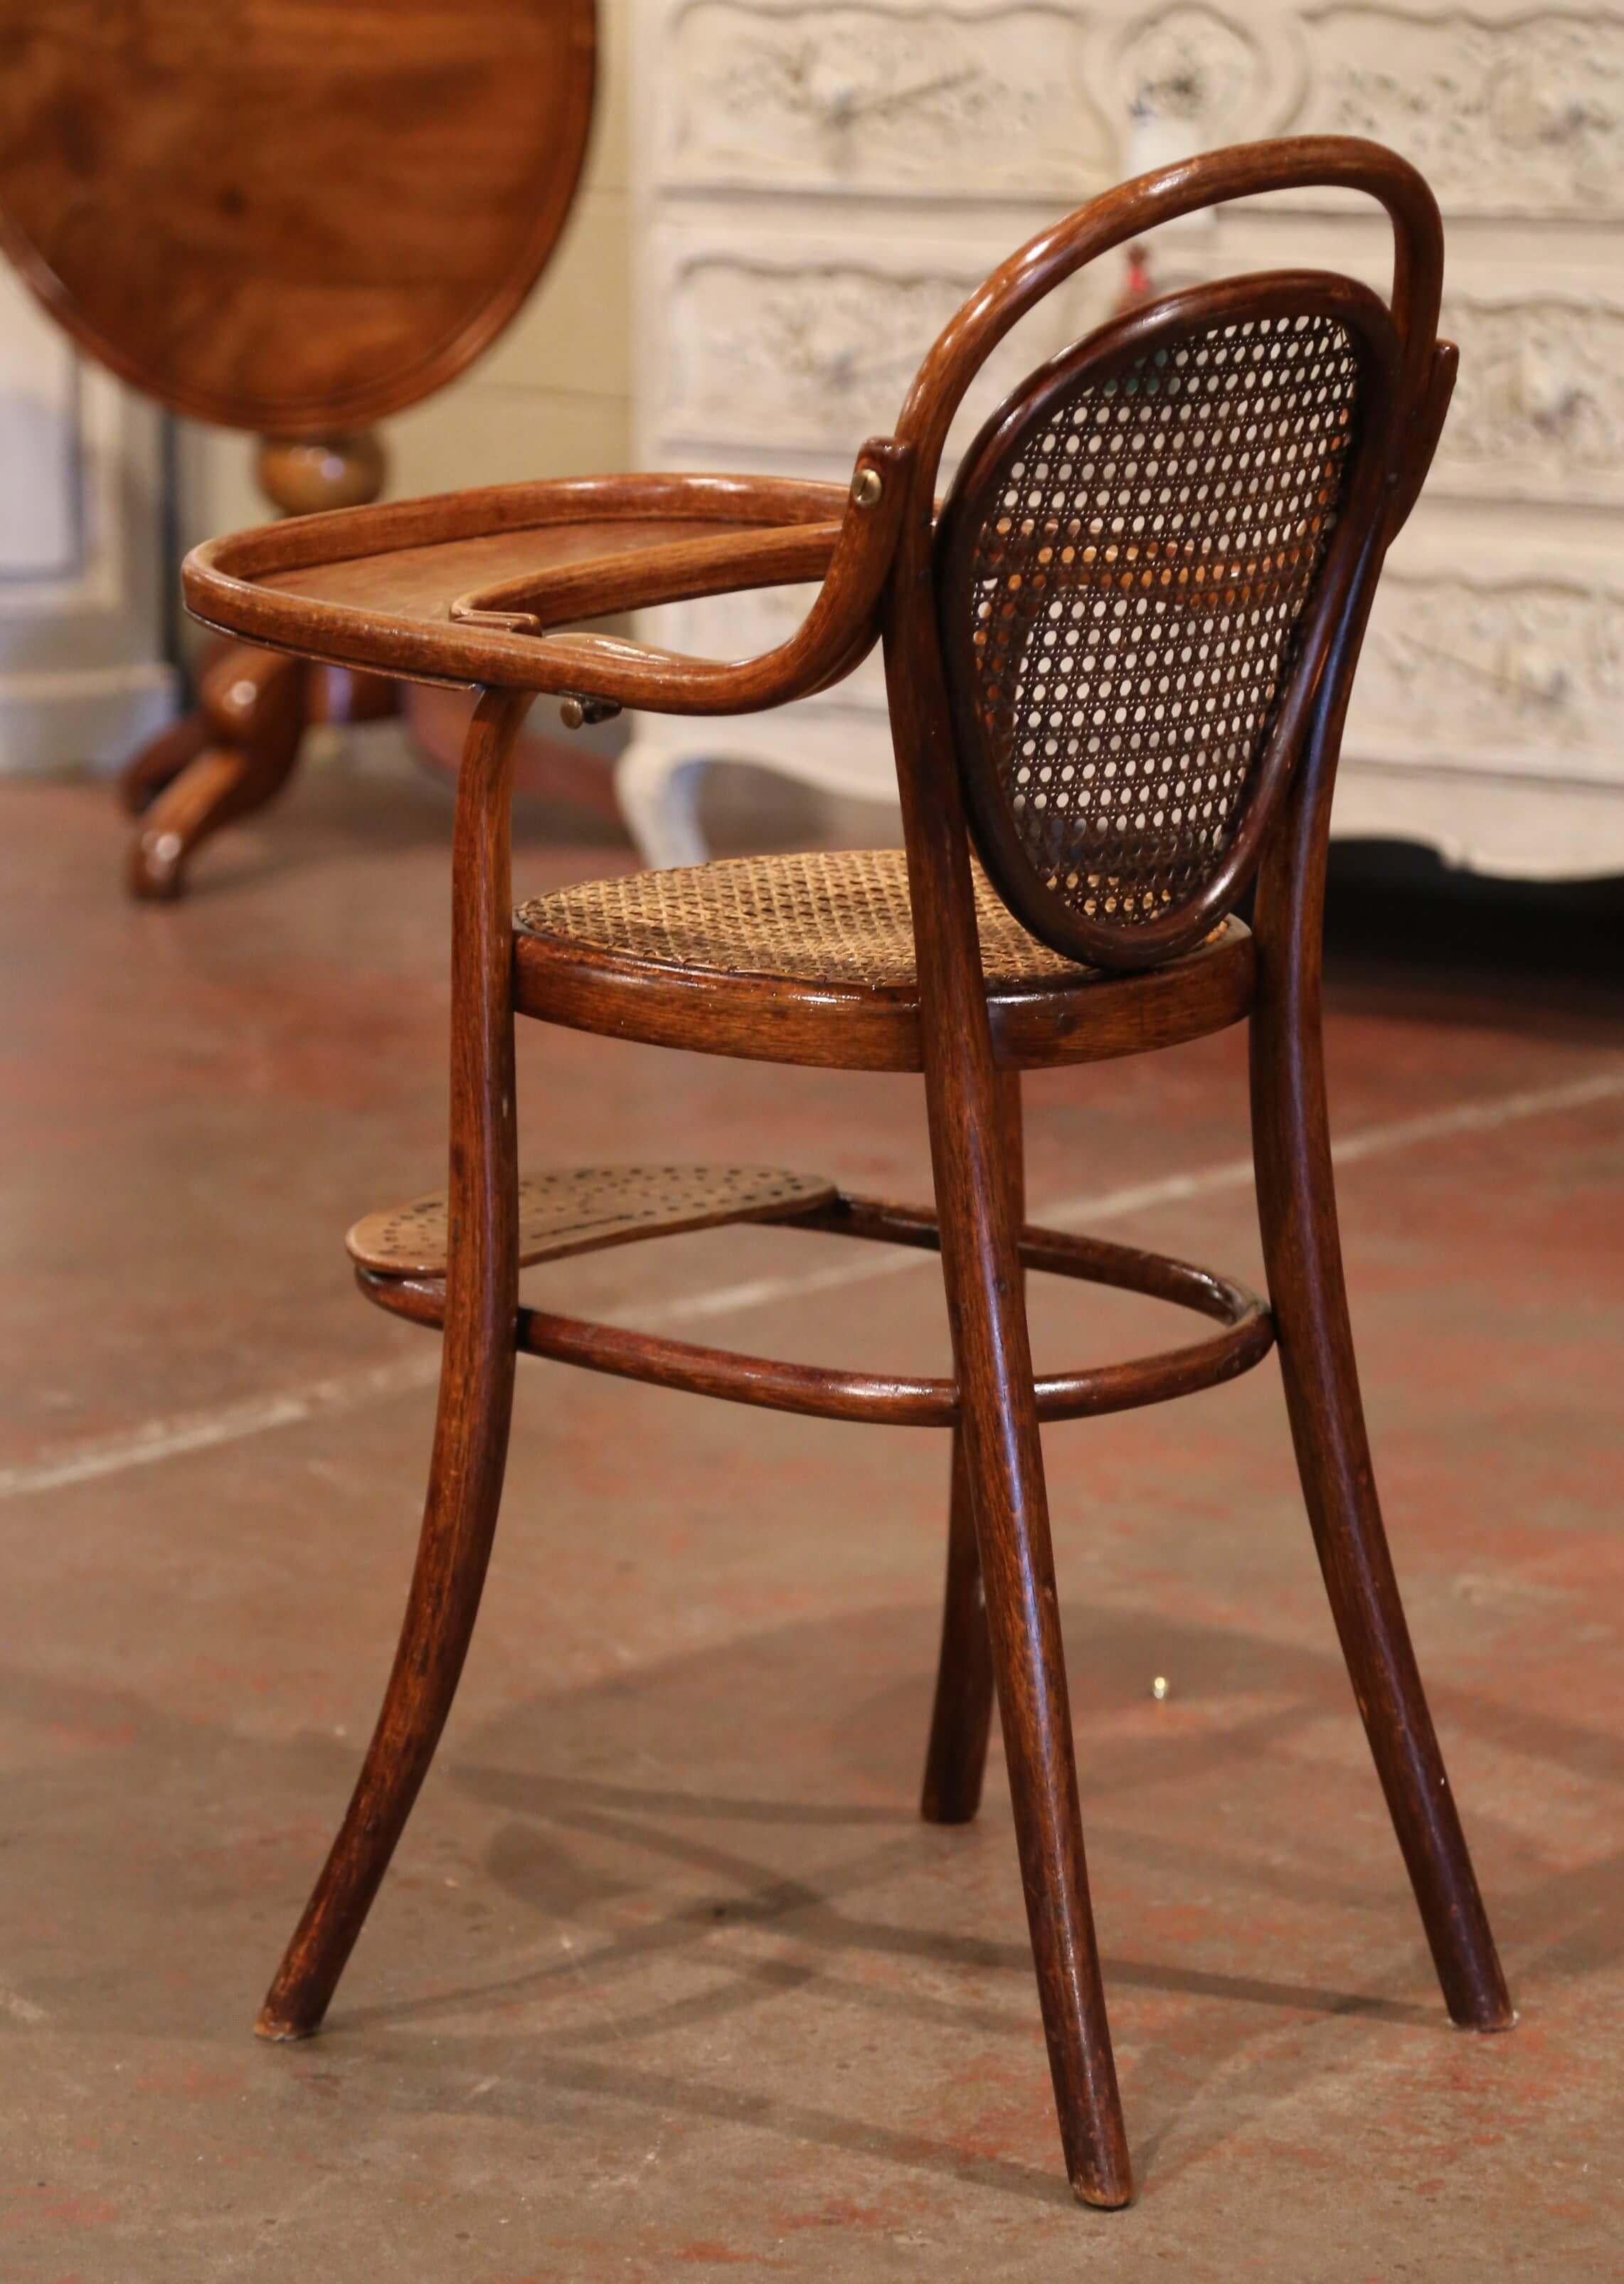 Early 20th Century French Bentwood and Cane High Baby Chair by M. Thonet For Sale 5